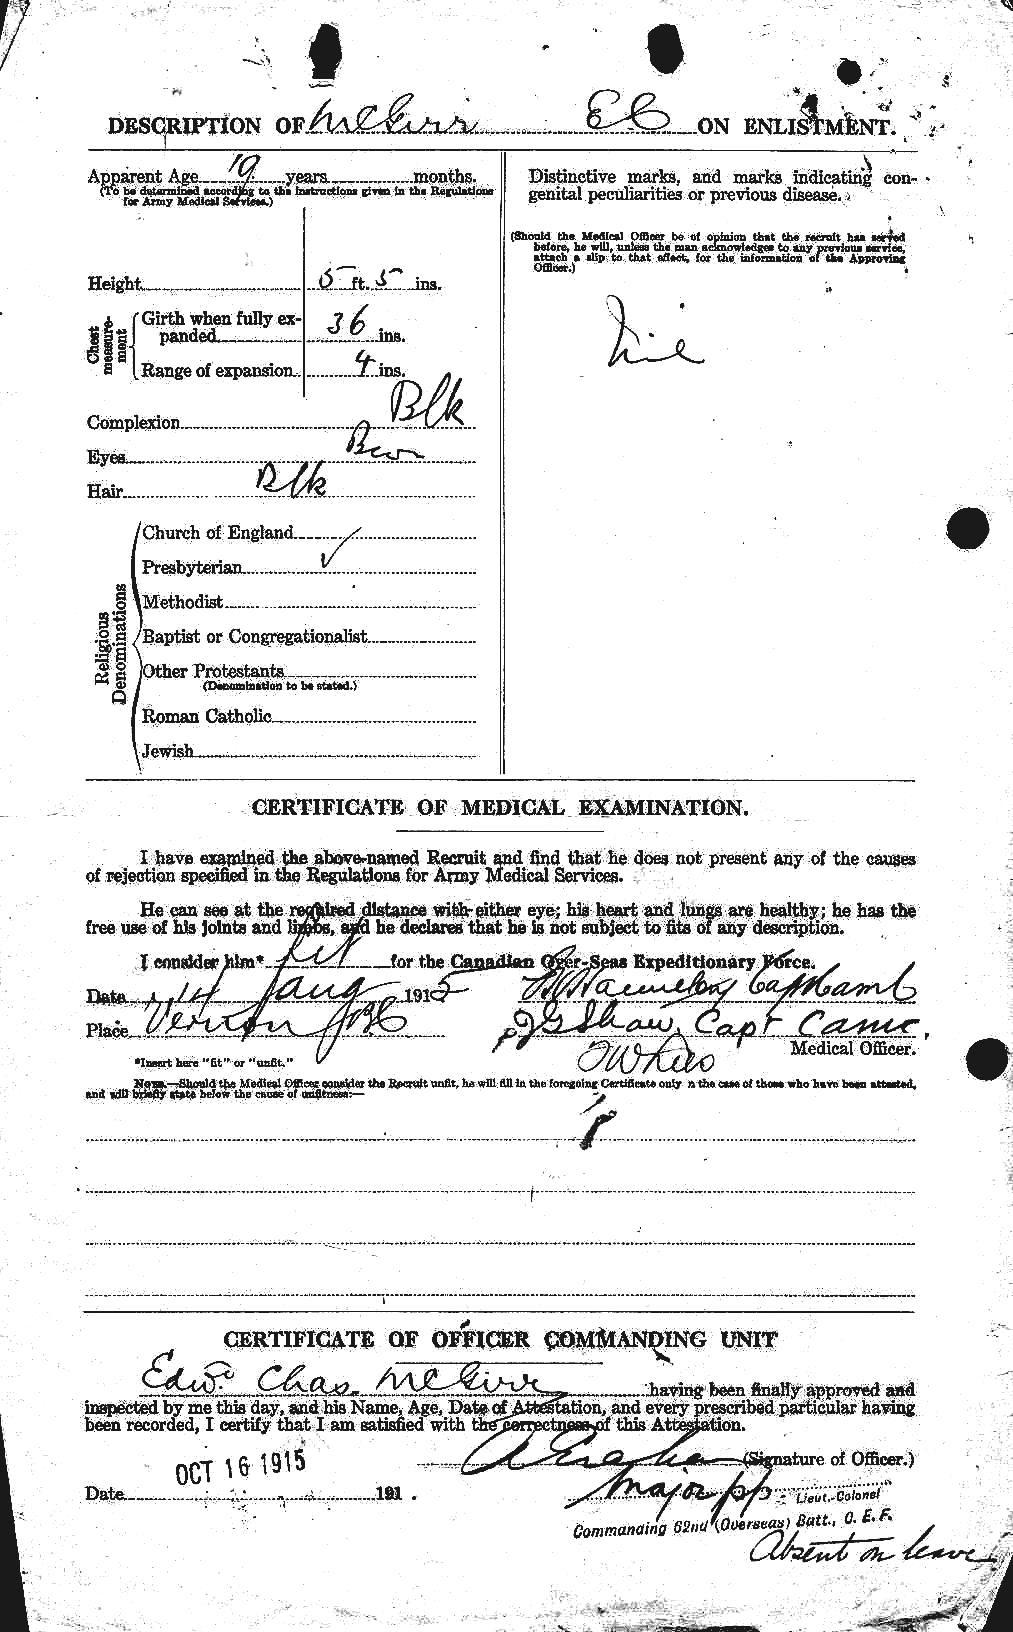 Personnel Records of the First World War - CEF 526449b